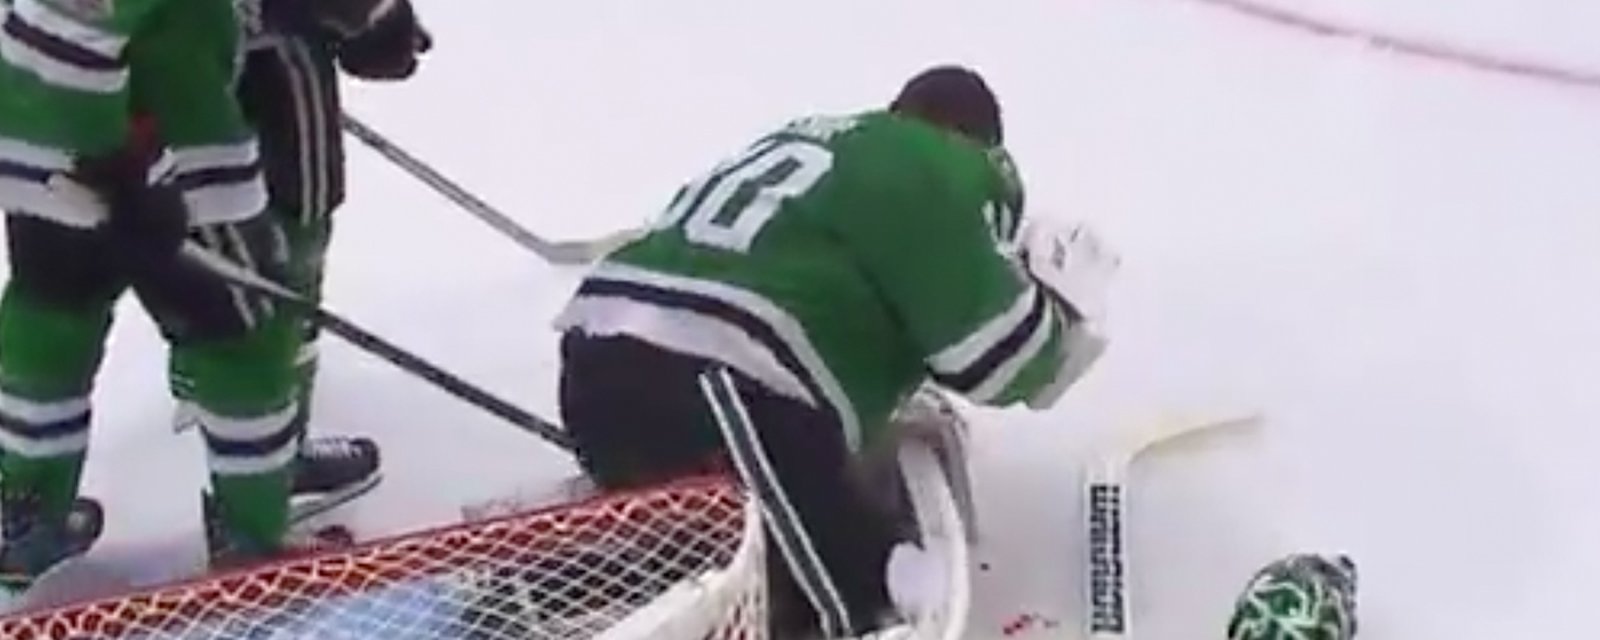 Must See: Stars’ Bishop reveals brutal injury from Friday’s head shot